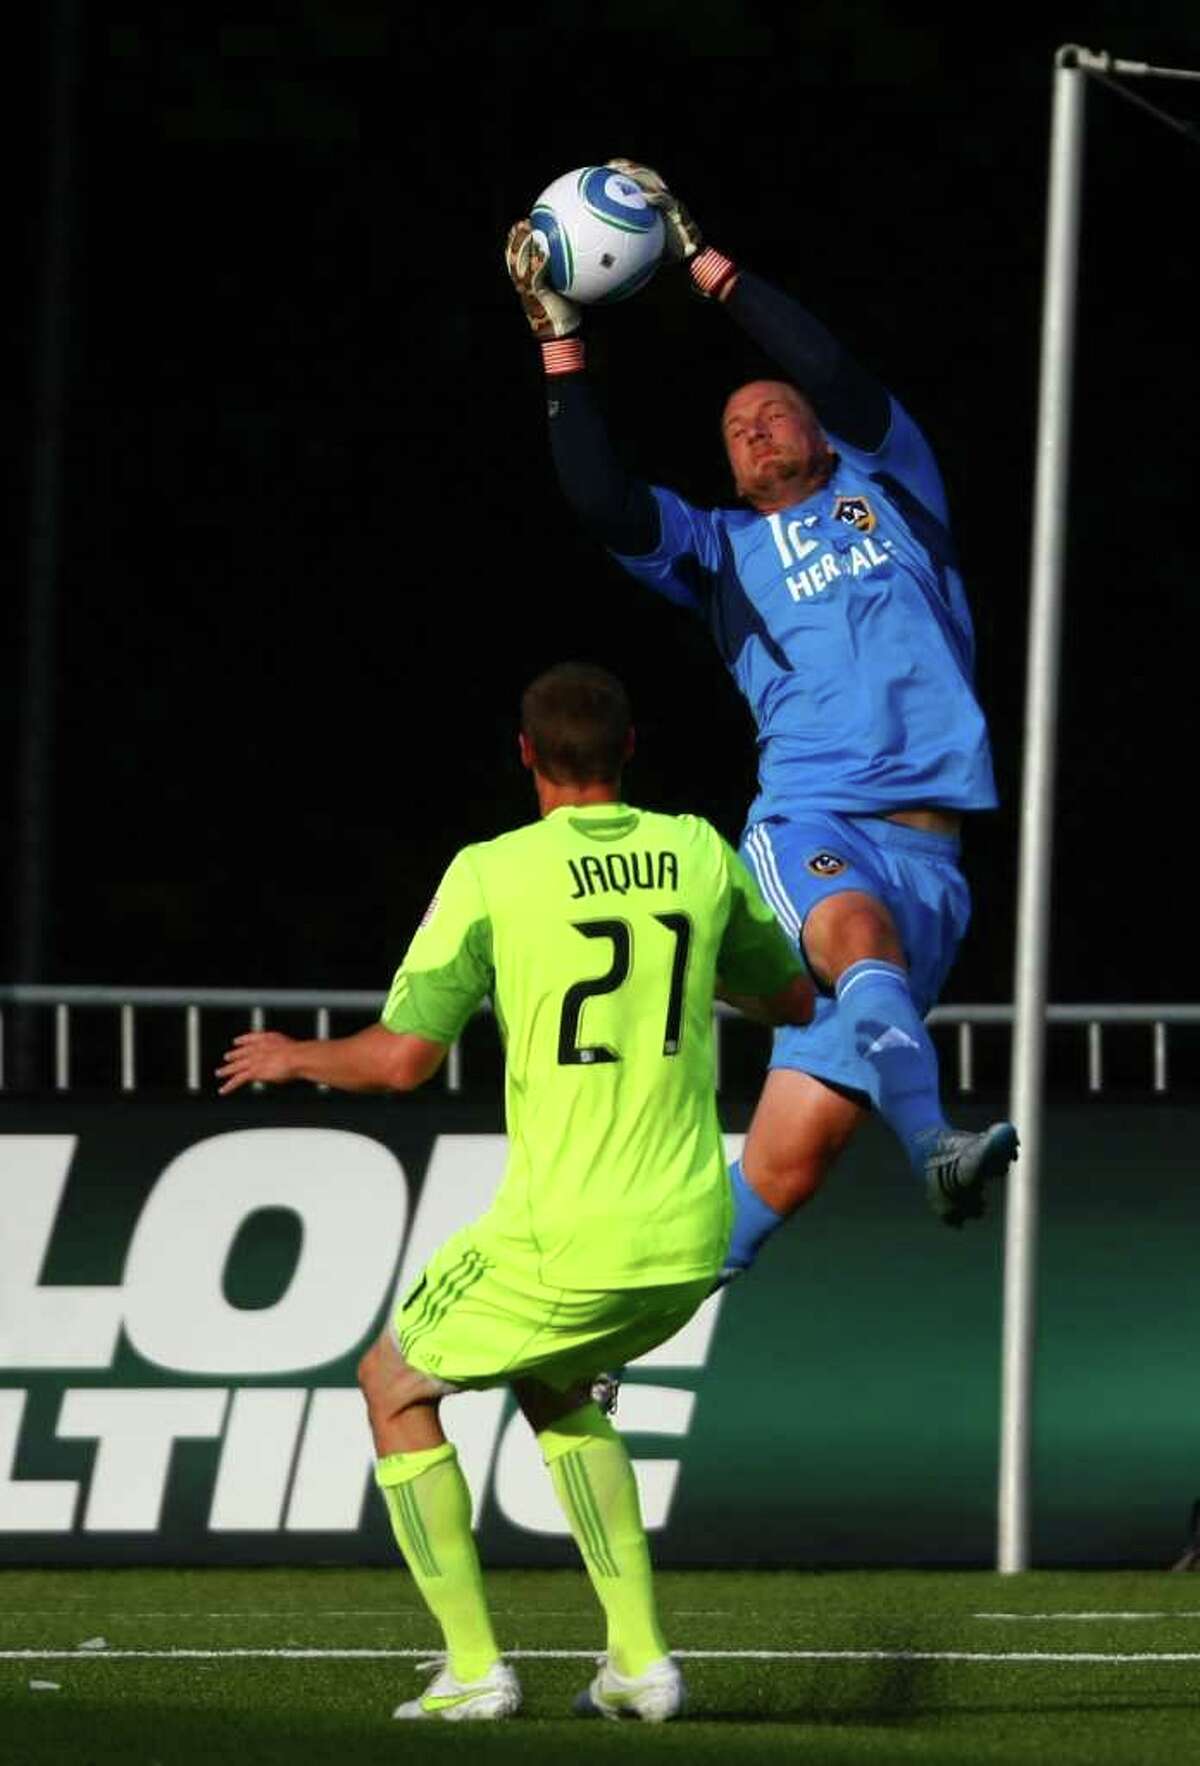 LA Galaxy goalie Josh Saunders stops a goal attempt by Seattle Sounders player Nate Jaqua during the first half of a U.S. Open Cup quarterfinal match at Starfire Sports Complex in Tukwila on Wednesday, July 13, 2011. The Sounders defeated the Galaxy 3-1.